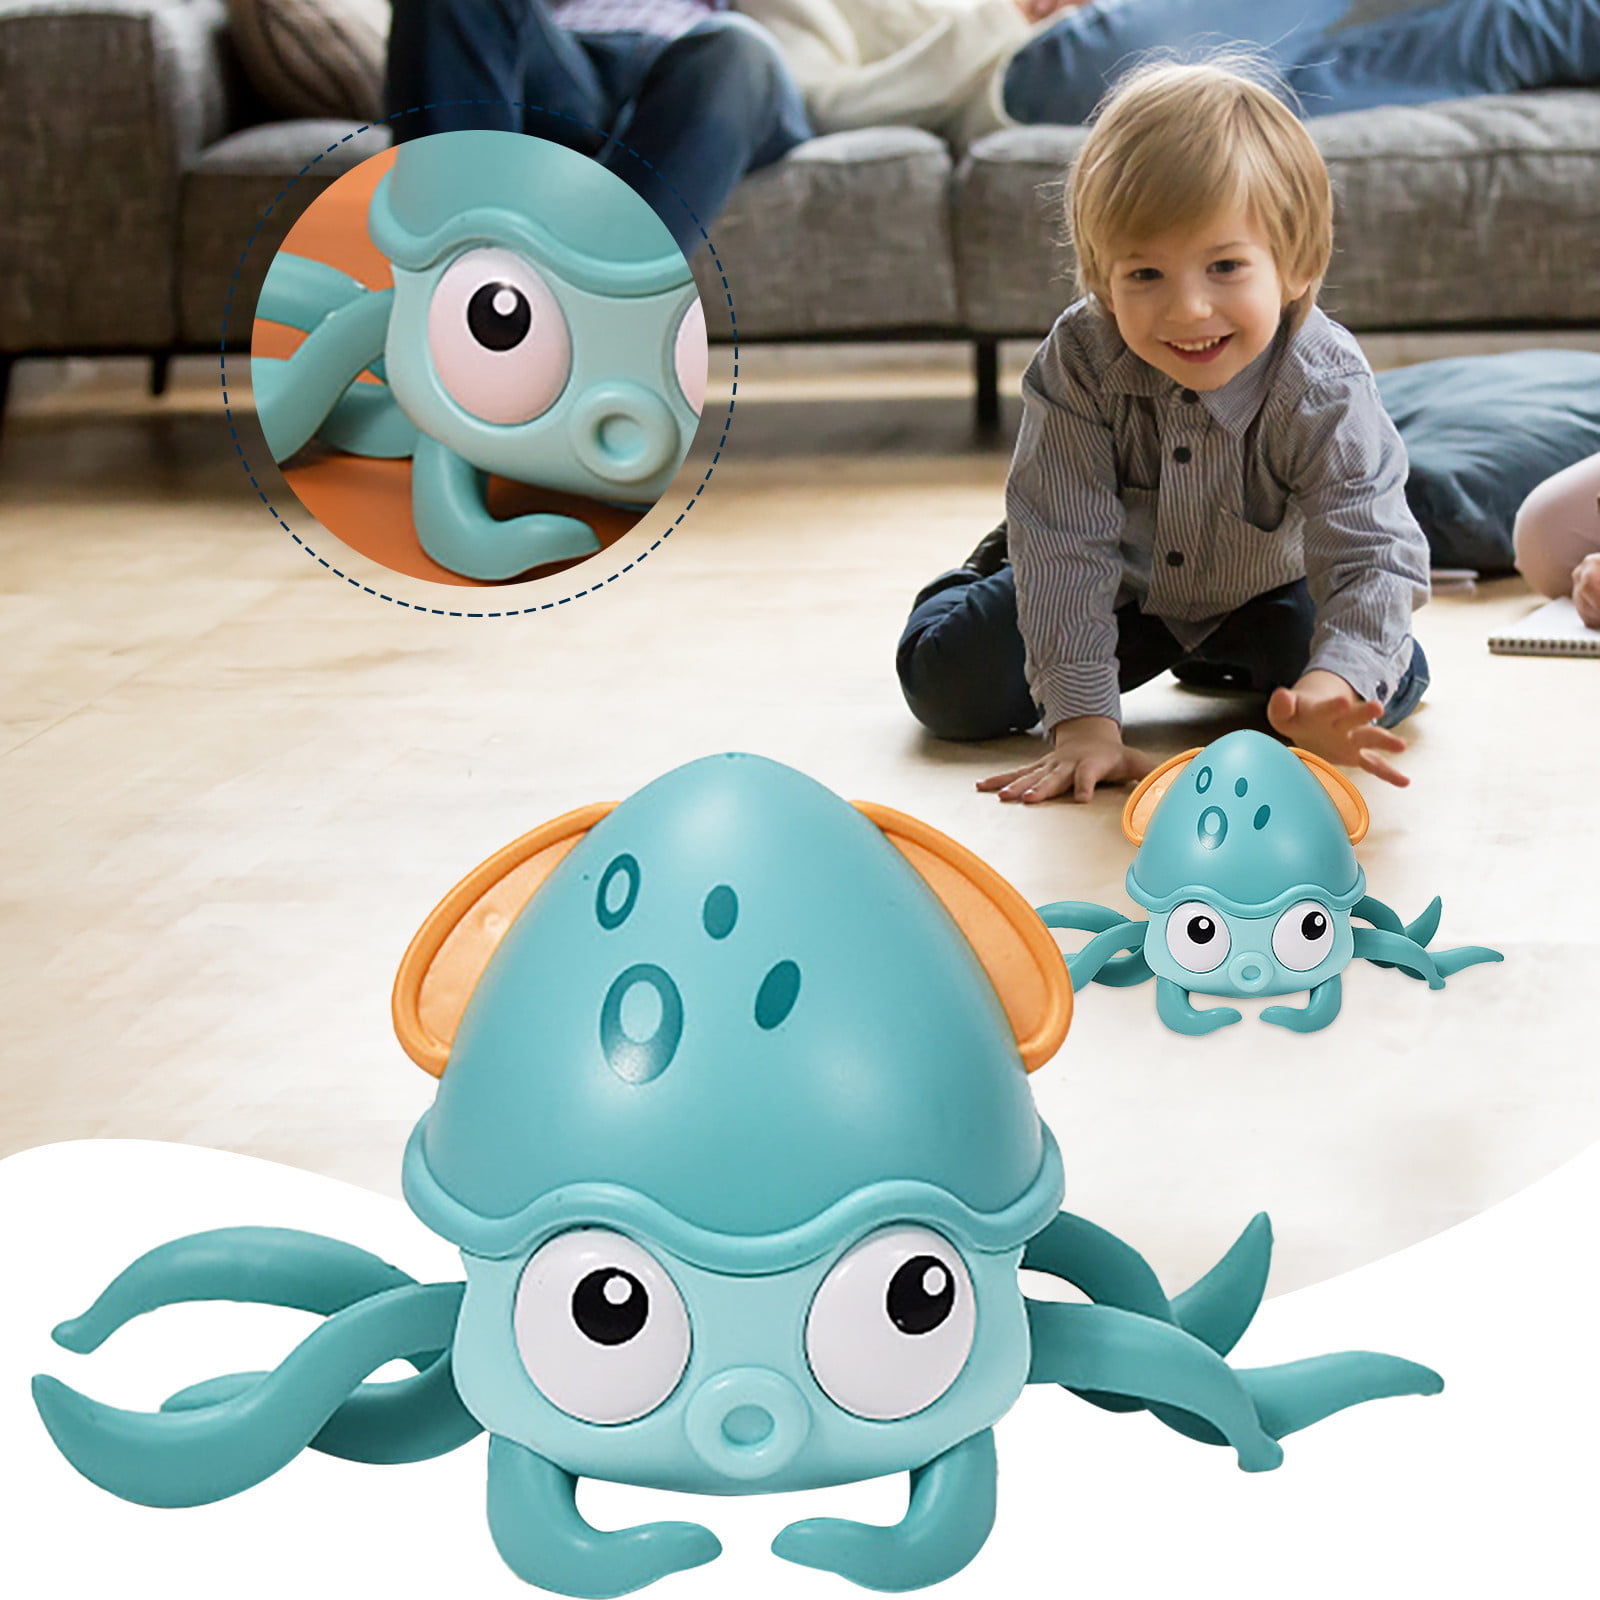 Moving Interactive Fun Toys Controlled by Toddler's Hands or Feet Crawling Crab Baby Toys with Light Up and Music Crab Toys with Sensor Obstacle Avoidance Function for Playing,Learning,Walking 